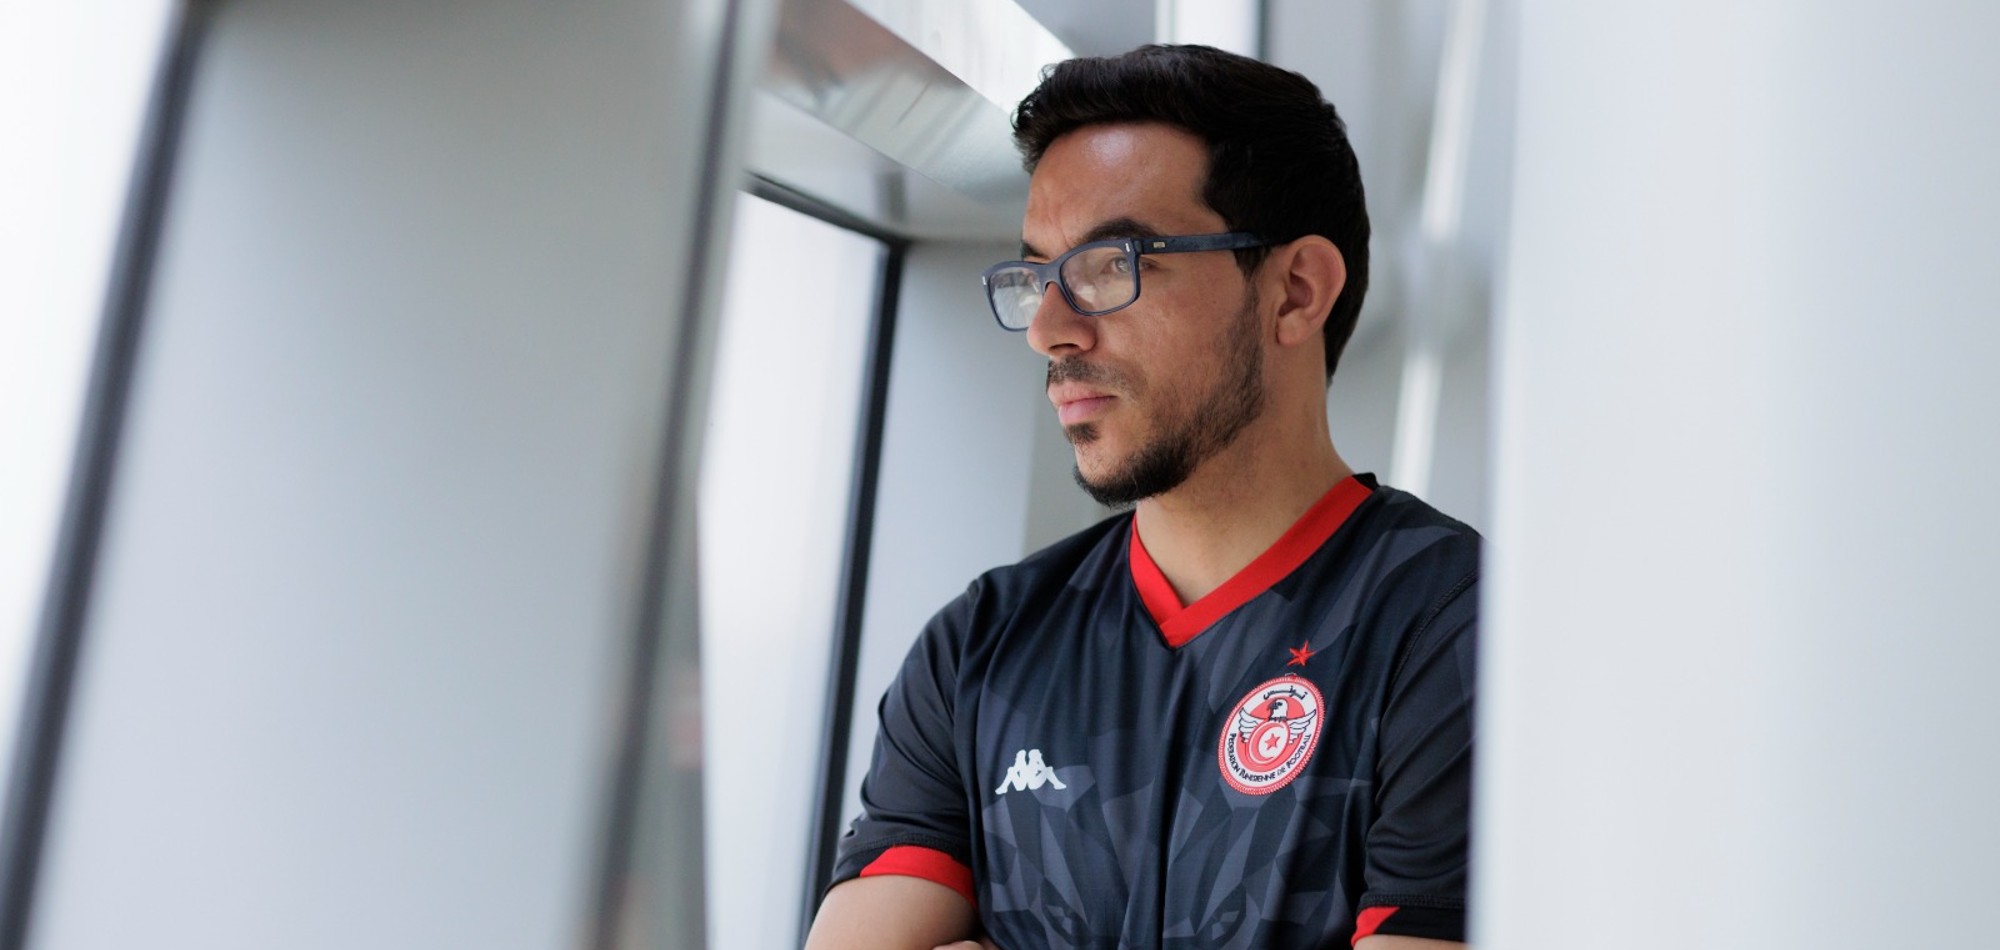 ‘This World Cup means so much to Tunisia and the Arab world’